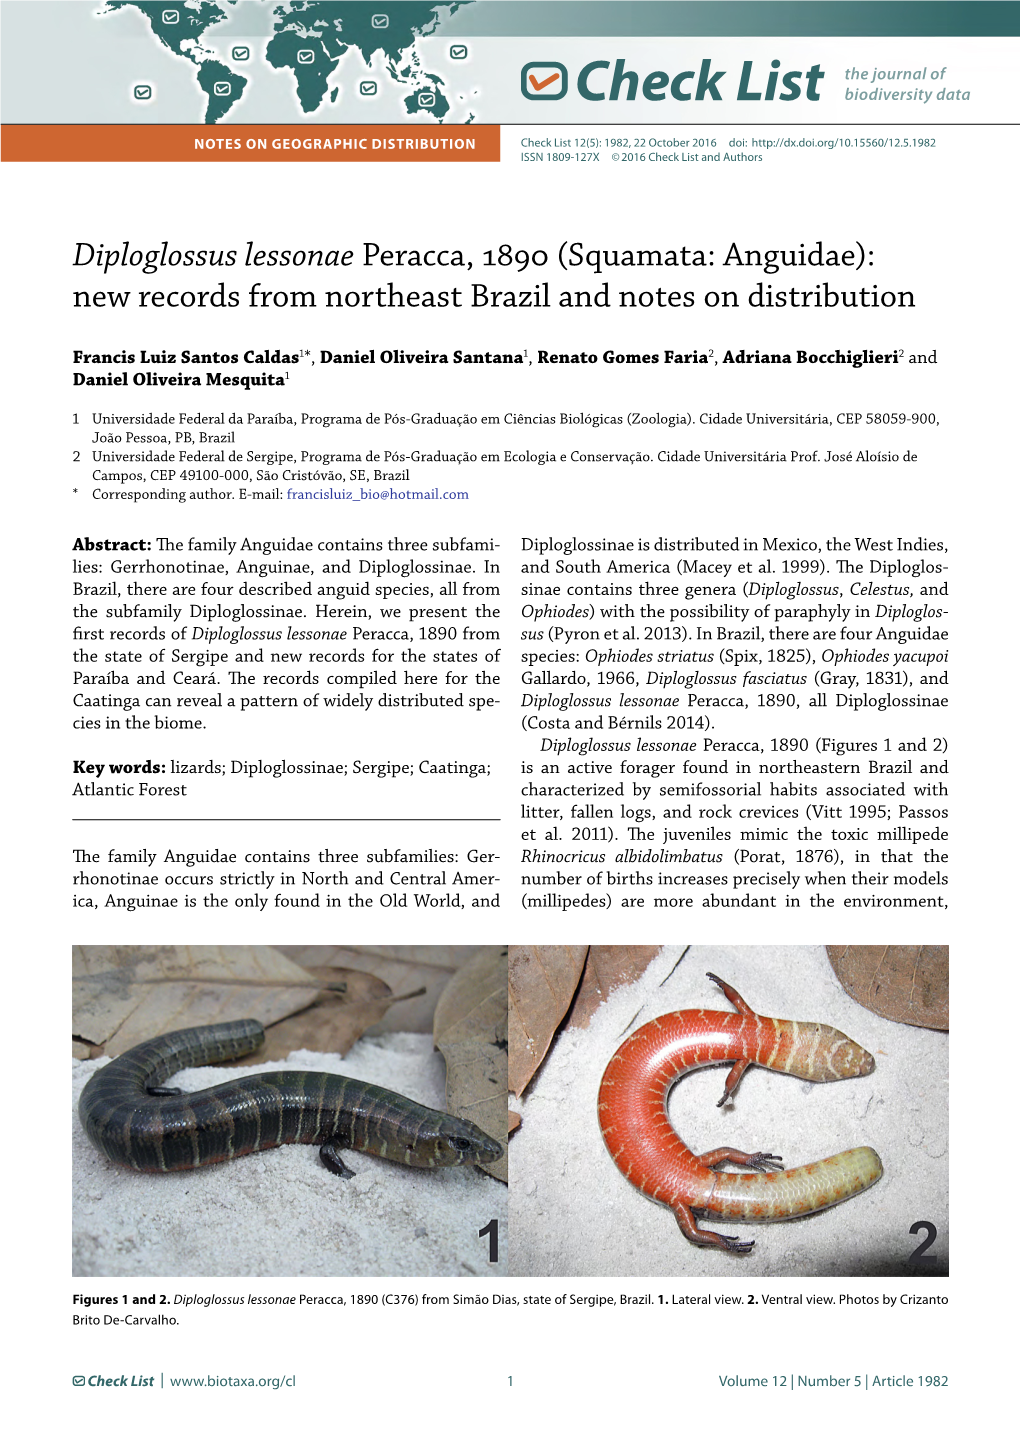 Diploglossus Lessonae Peracca, 1890 (Squamata: Anguidae): New Records from Northeast Brazil and Notes on Distribution